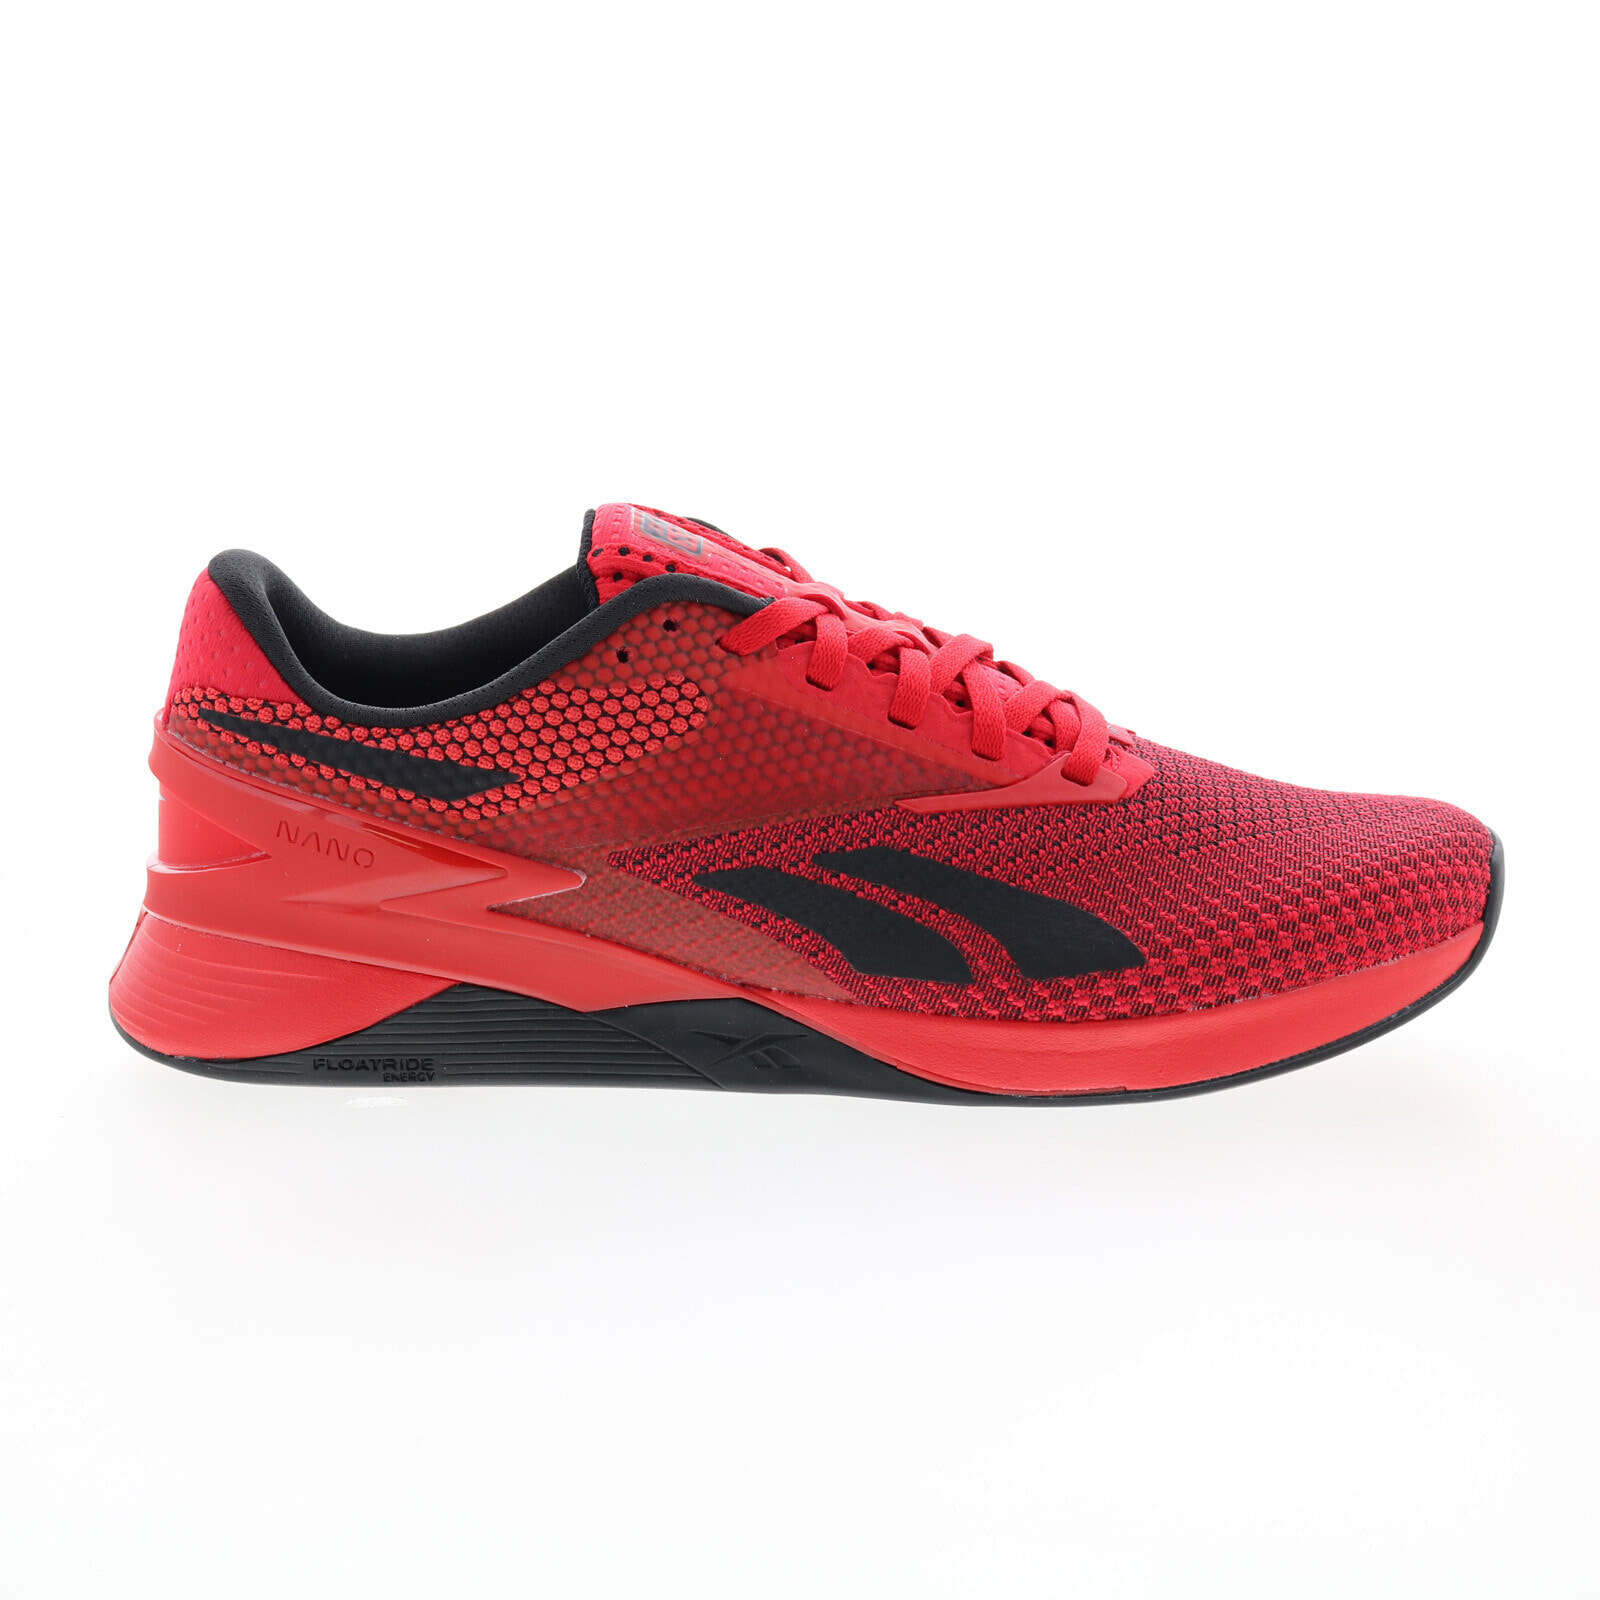 Reebok Nano X3 HP6043 Mens Red Synthetic Athletic Cross Training Shoes